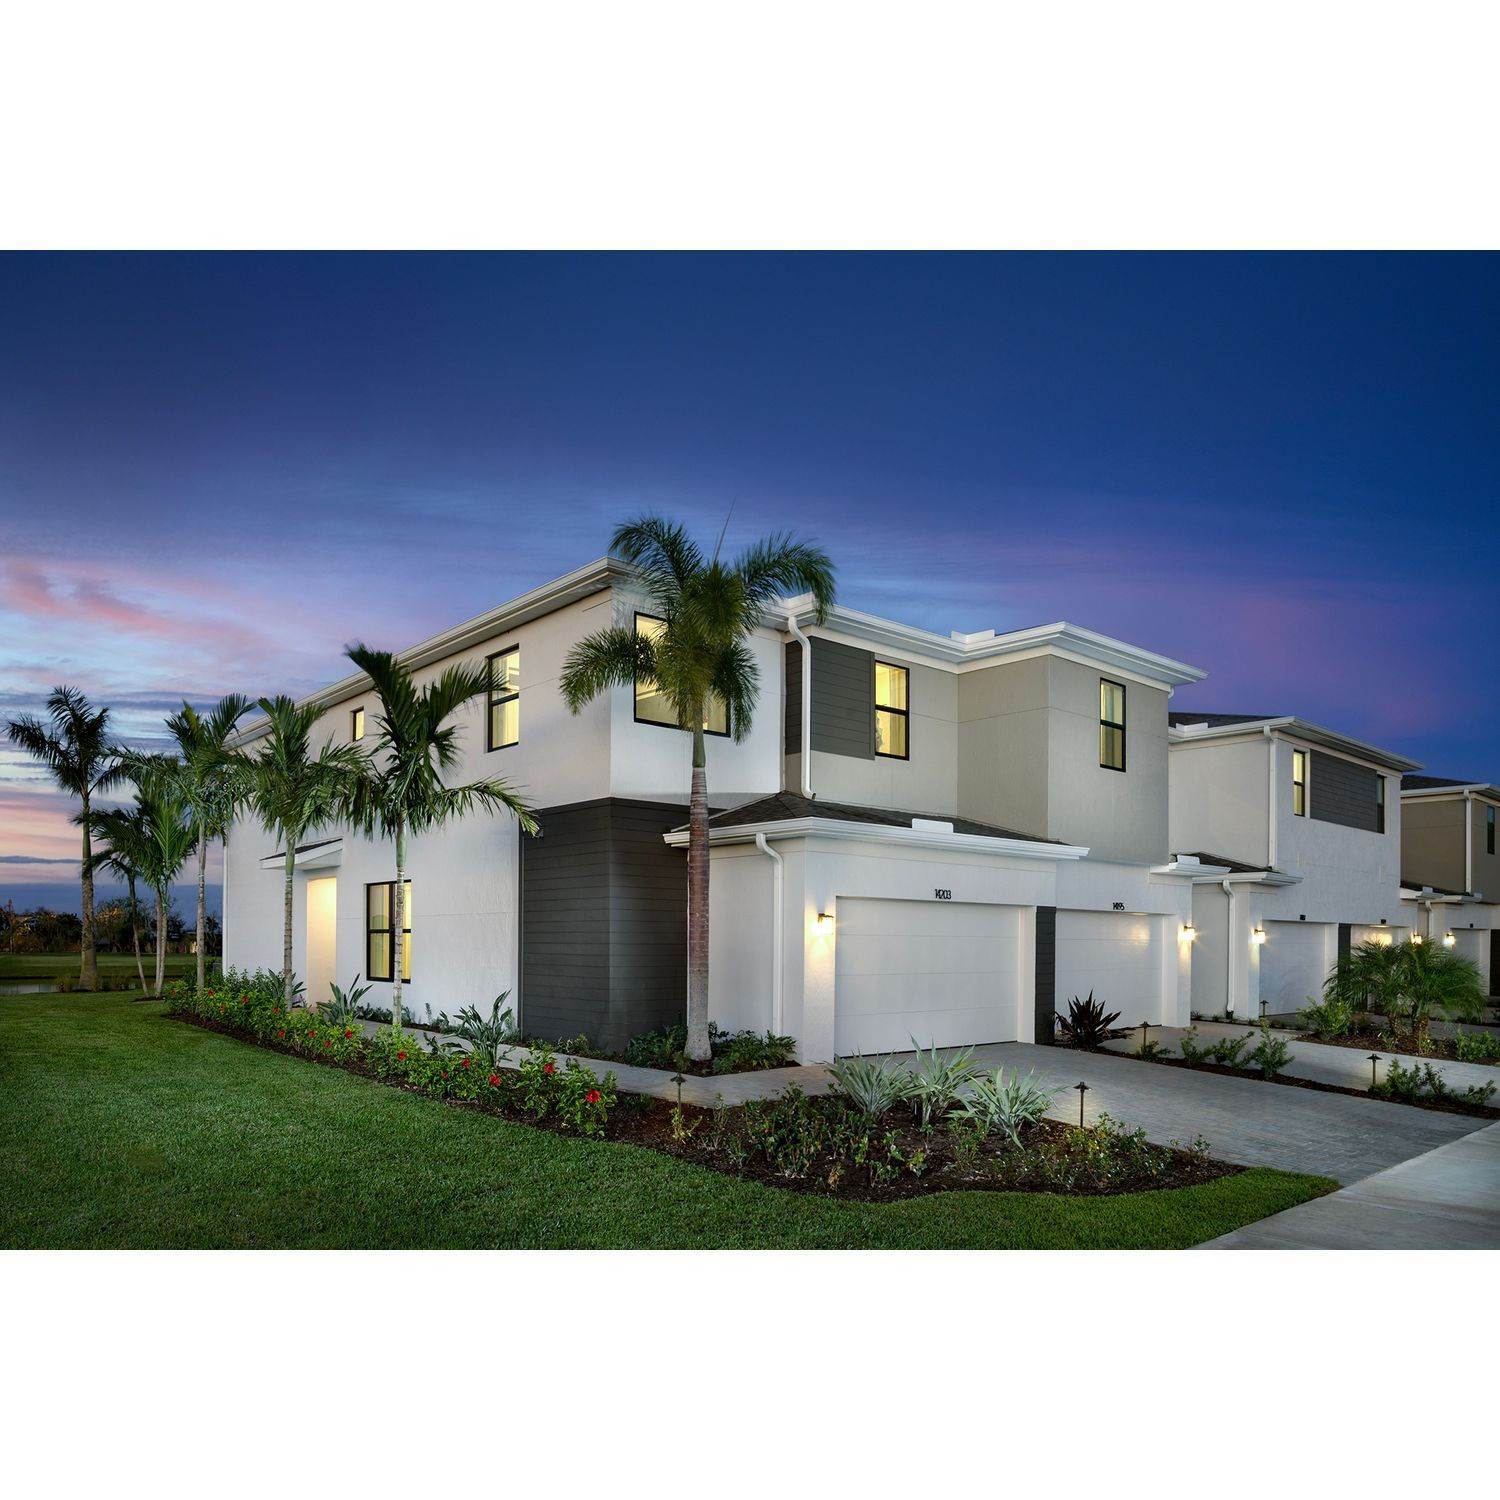 12. Tradition - Cadence - Townhomes xây dựng tại 10455 SW Orana Drive, Port St. Lucie, FL 34987